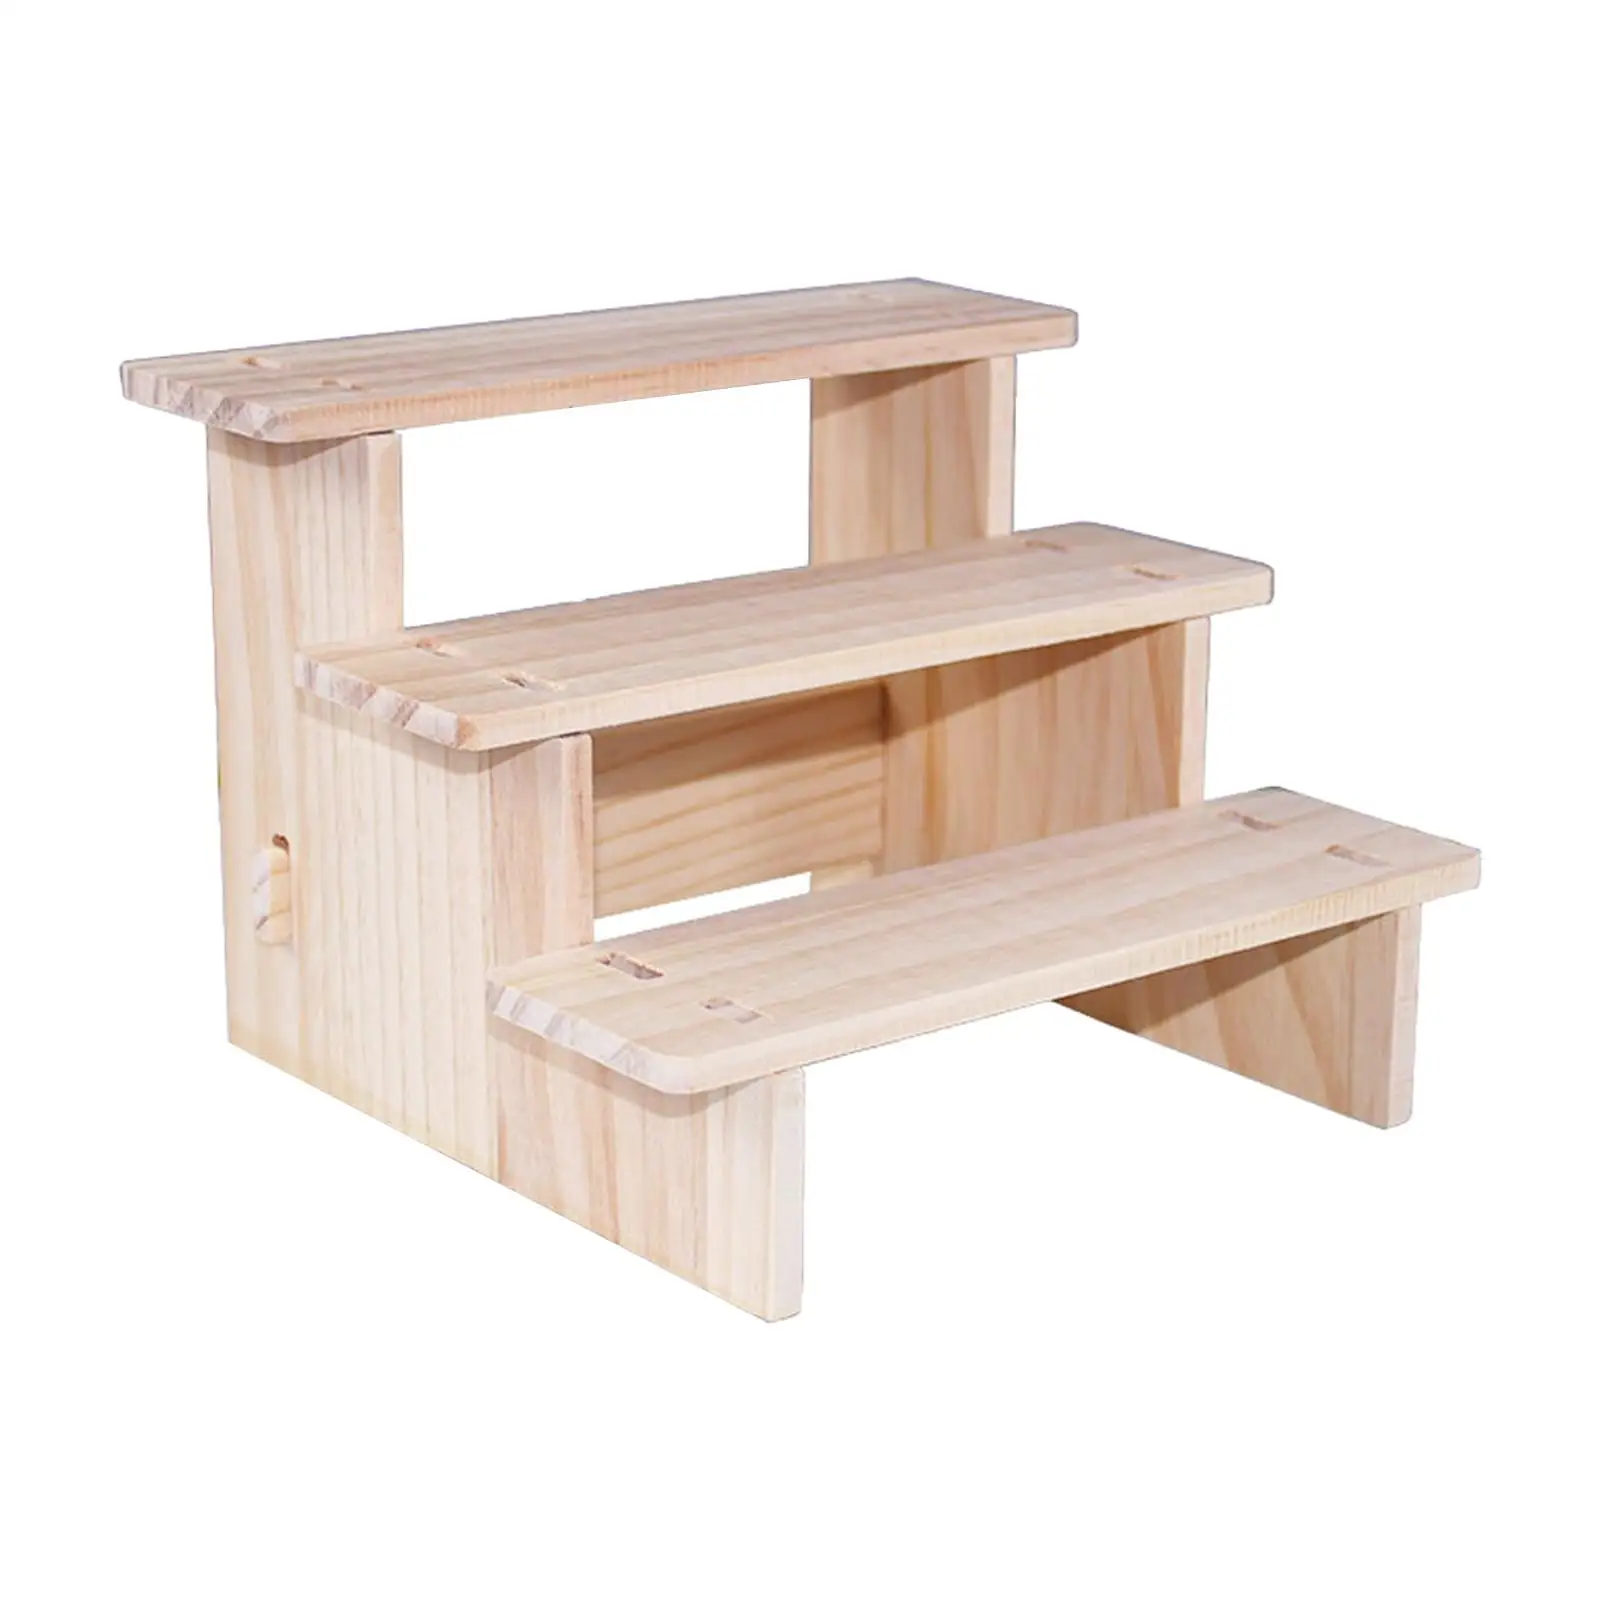 Wood Display Riser Stand Wooden Display Shelf Multilayer Reveal Frame Product Stand Jewelry Display Riser Shelf for Figurines